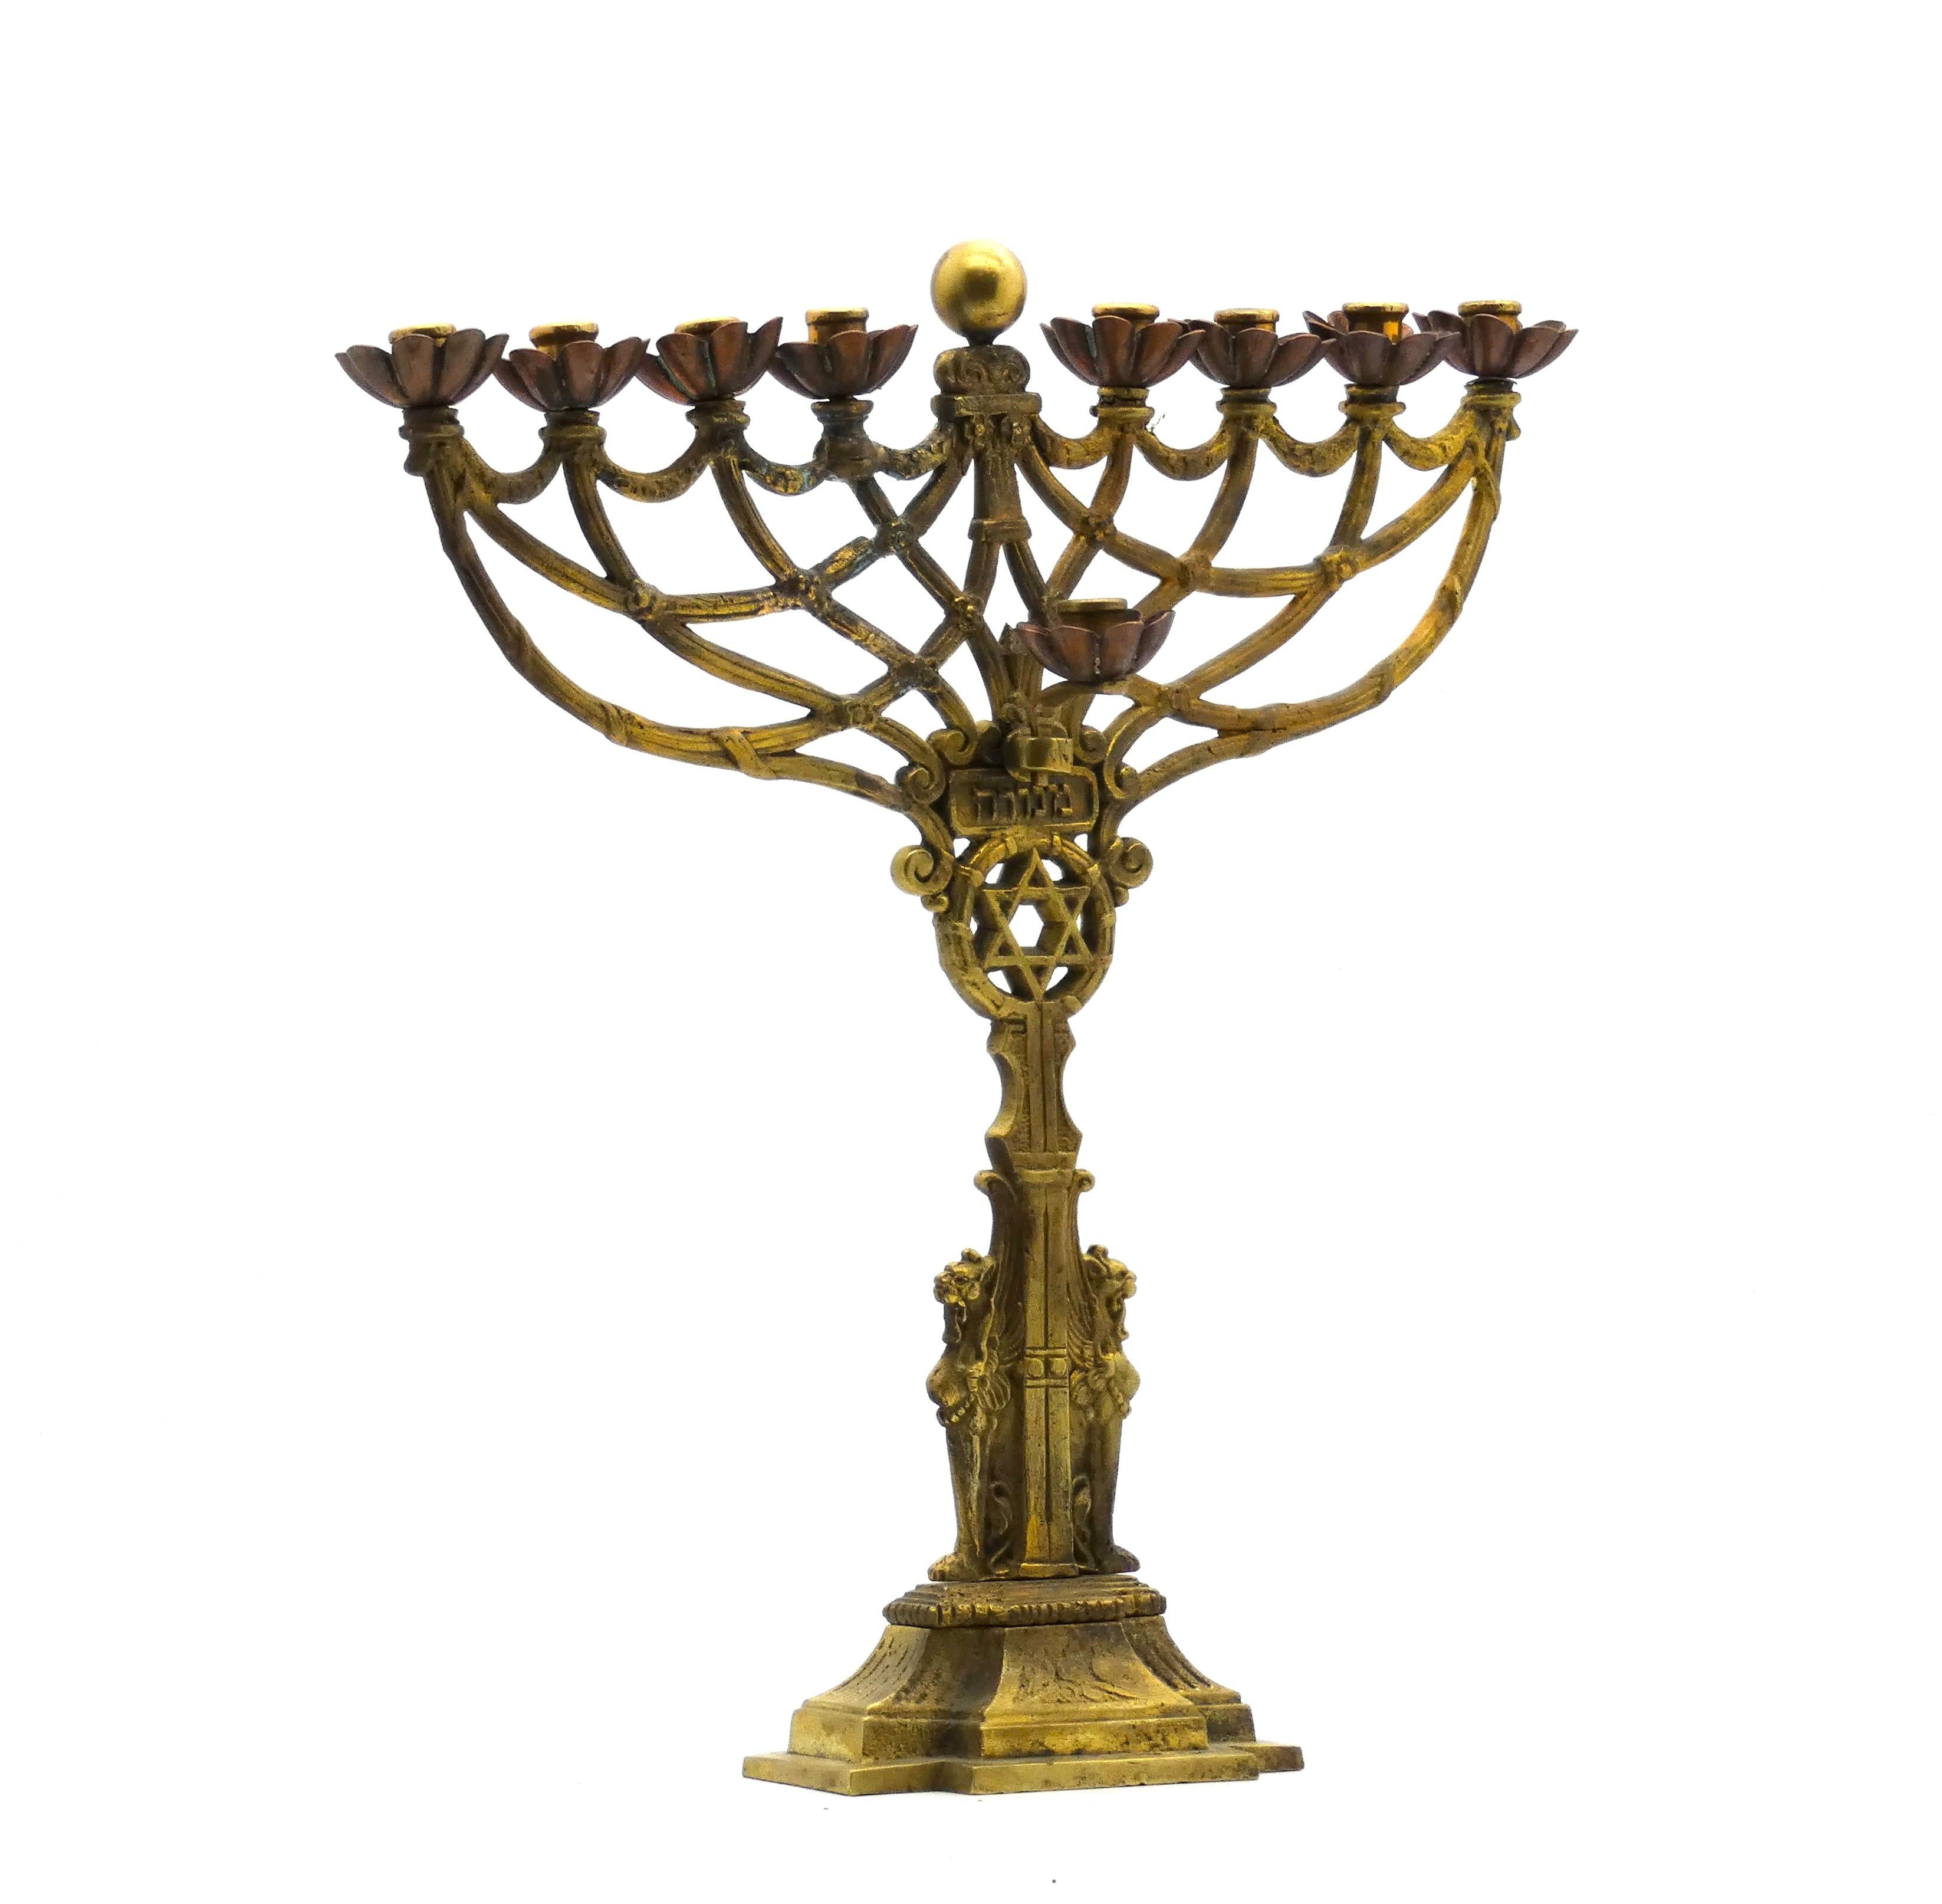 Egyptian-revival Hanukkah Lamp made in Germany in the late 19th century.

Expertly cast brass and copper featuring highly detailed motifs such as a Star of David in a vine wreath surmounted on an Egyptian column stem flanked by two upright griffins